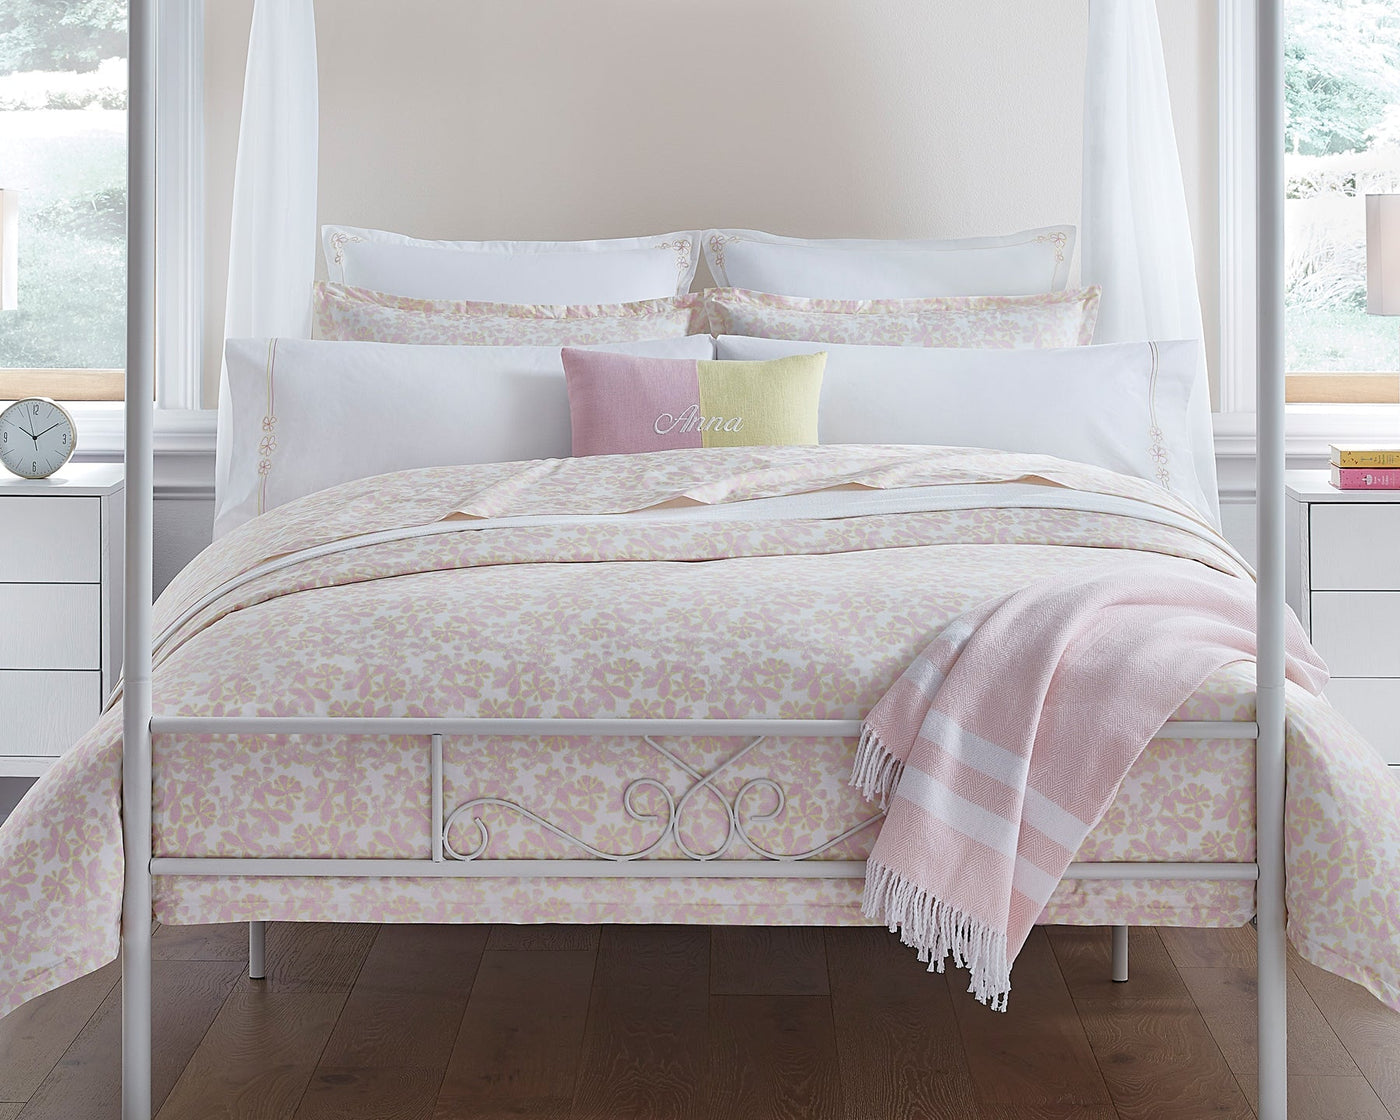 Bed with pink and yellow floral bedding